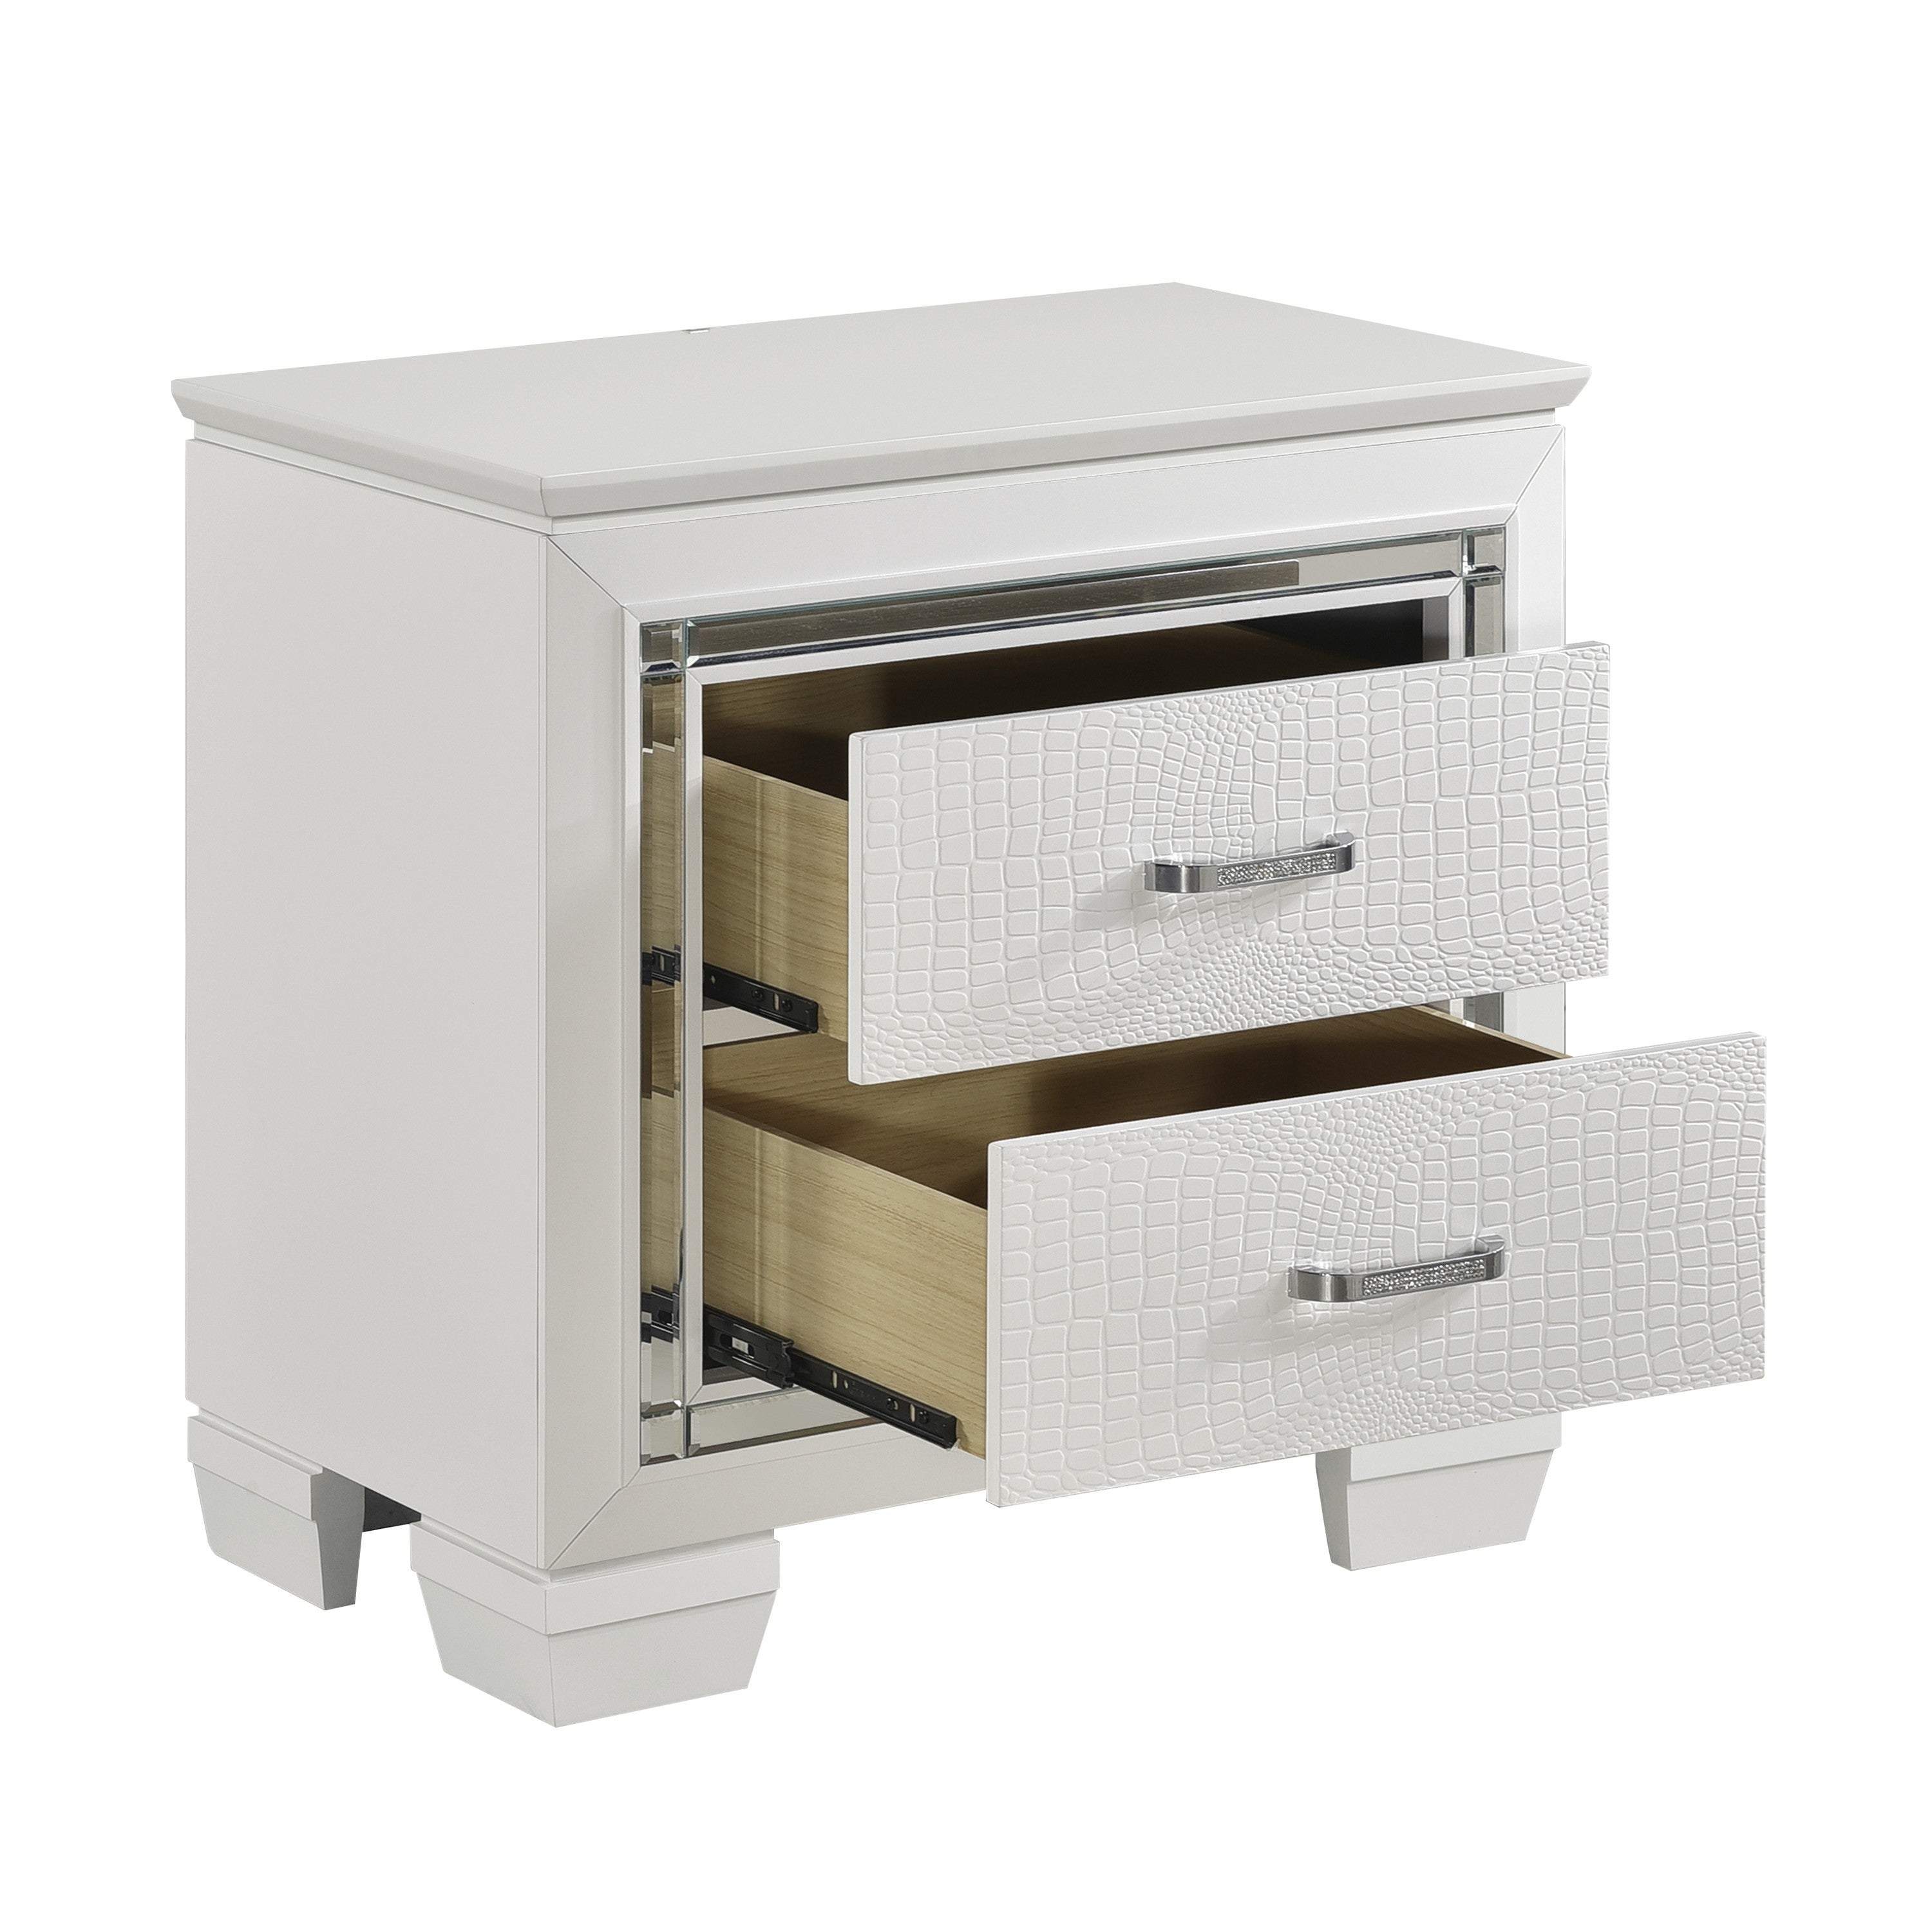 Allura White LED Upholstered Panel Youth Bedroom Set - SET | 1916FW-1 | 1916FW-2 | 1916FW-3 | 1916W-5 | 1916W-6 | 1916W-4 | 1916W-9 - Bien Home Furniture &amp; Electronics